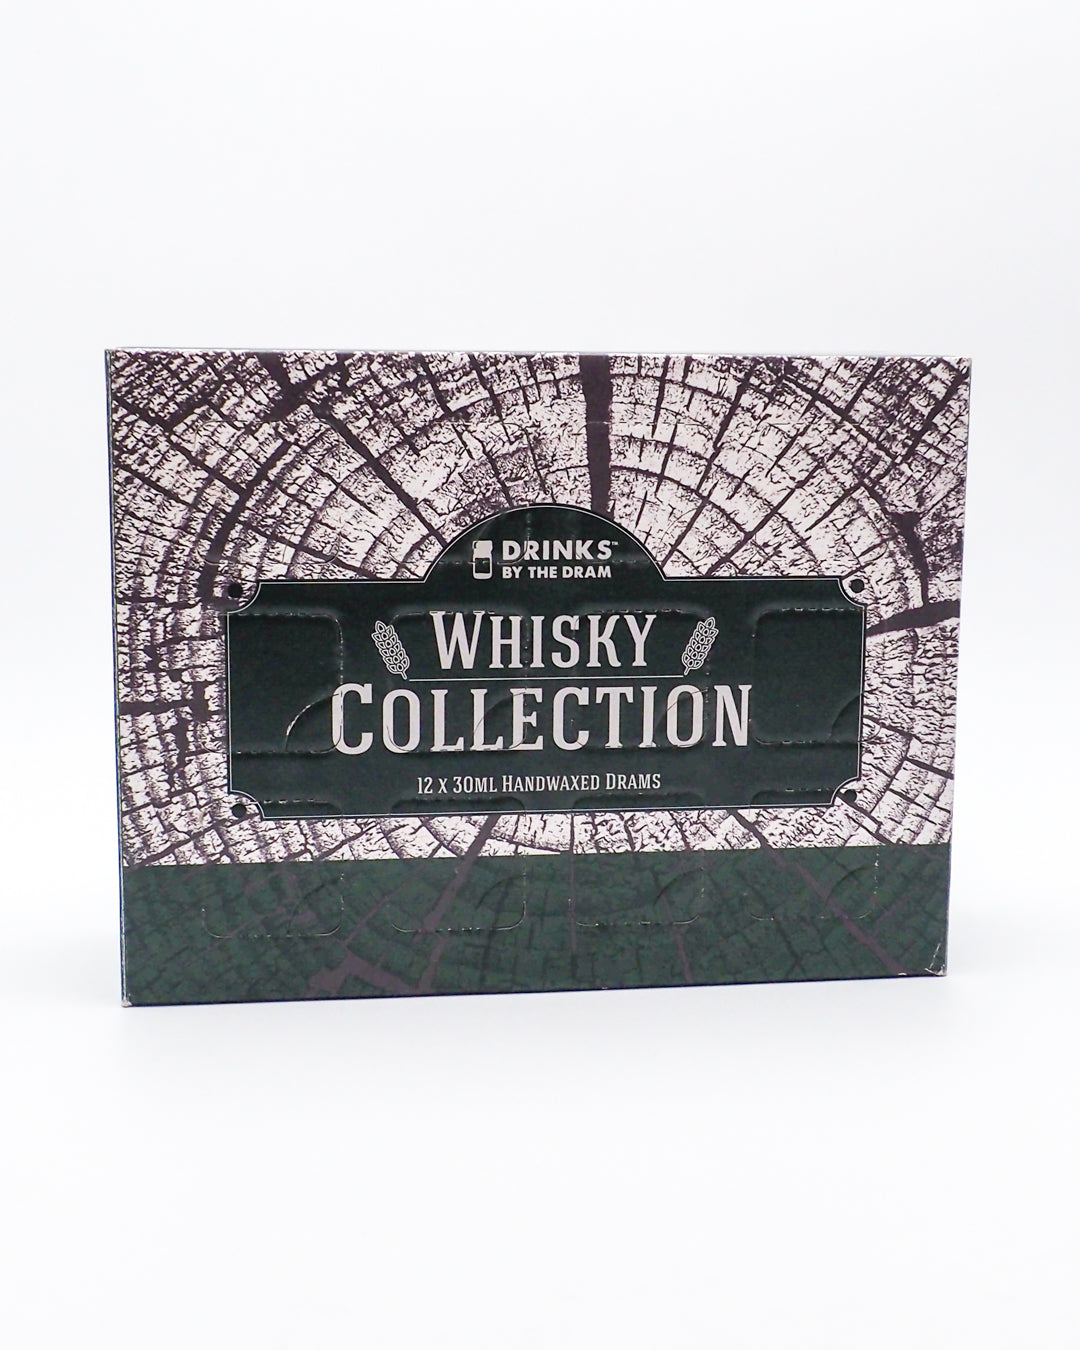 whisky-collection-drinks-by-the-dram-44-6-vol-12x36cl